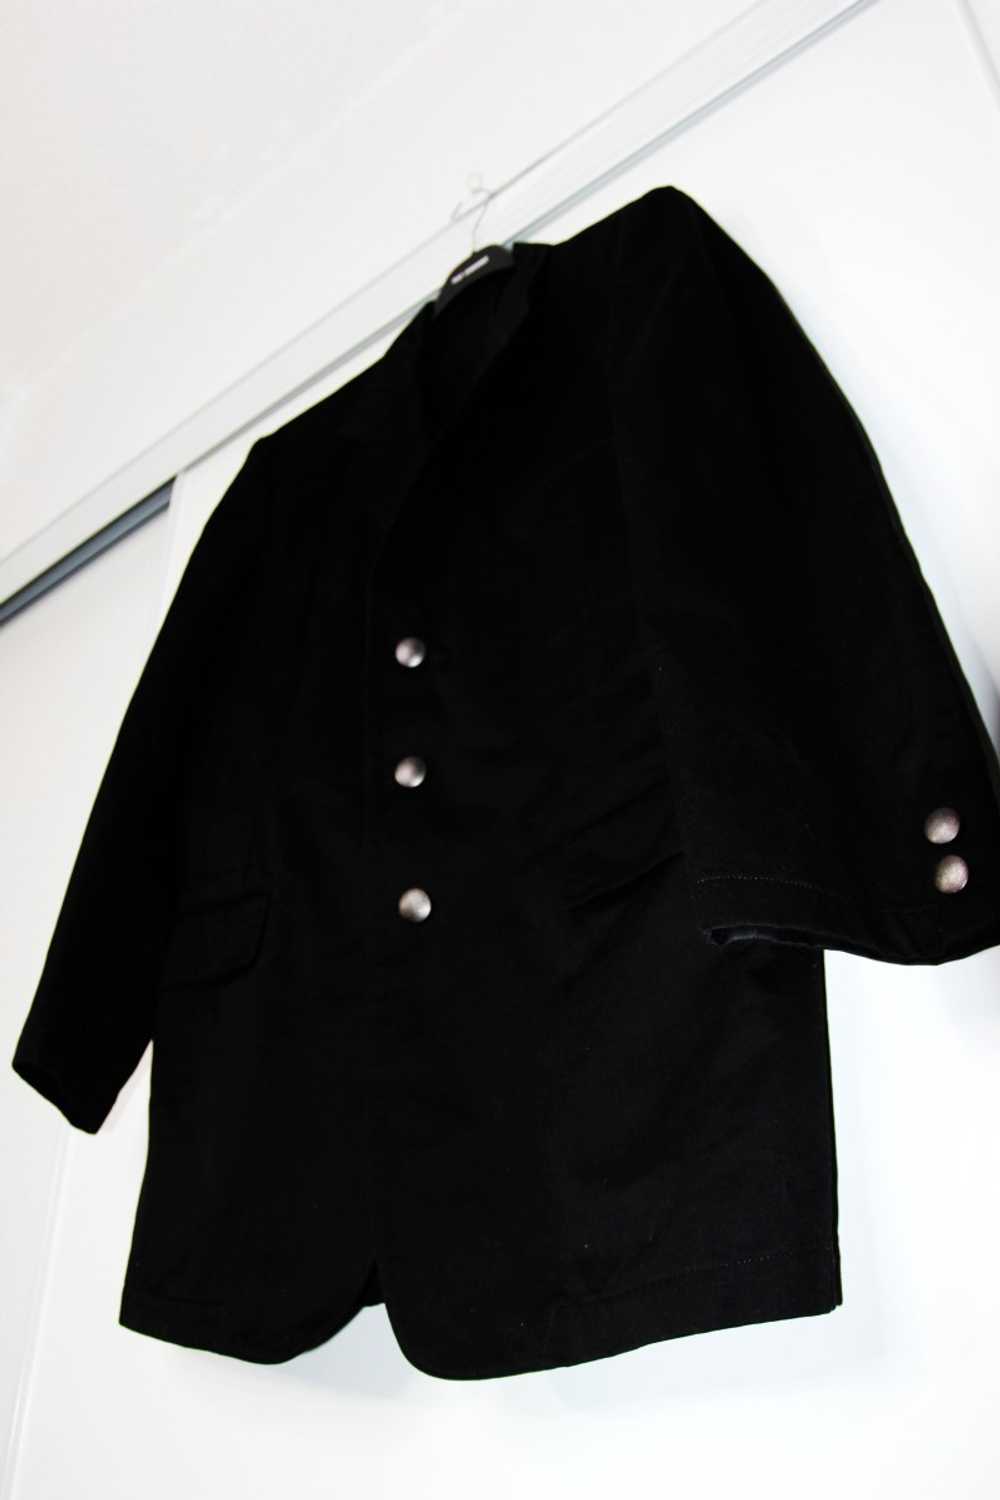 SS03 YOHJI YAMAMOTO POUR HOMME EMBROIDERED FLOWER… - image 7